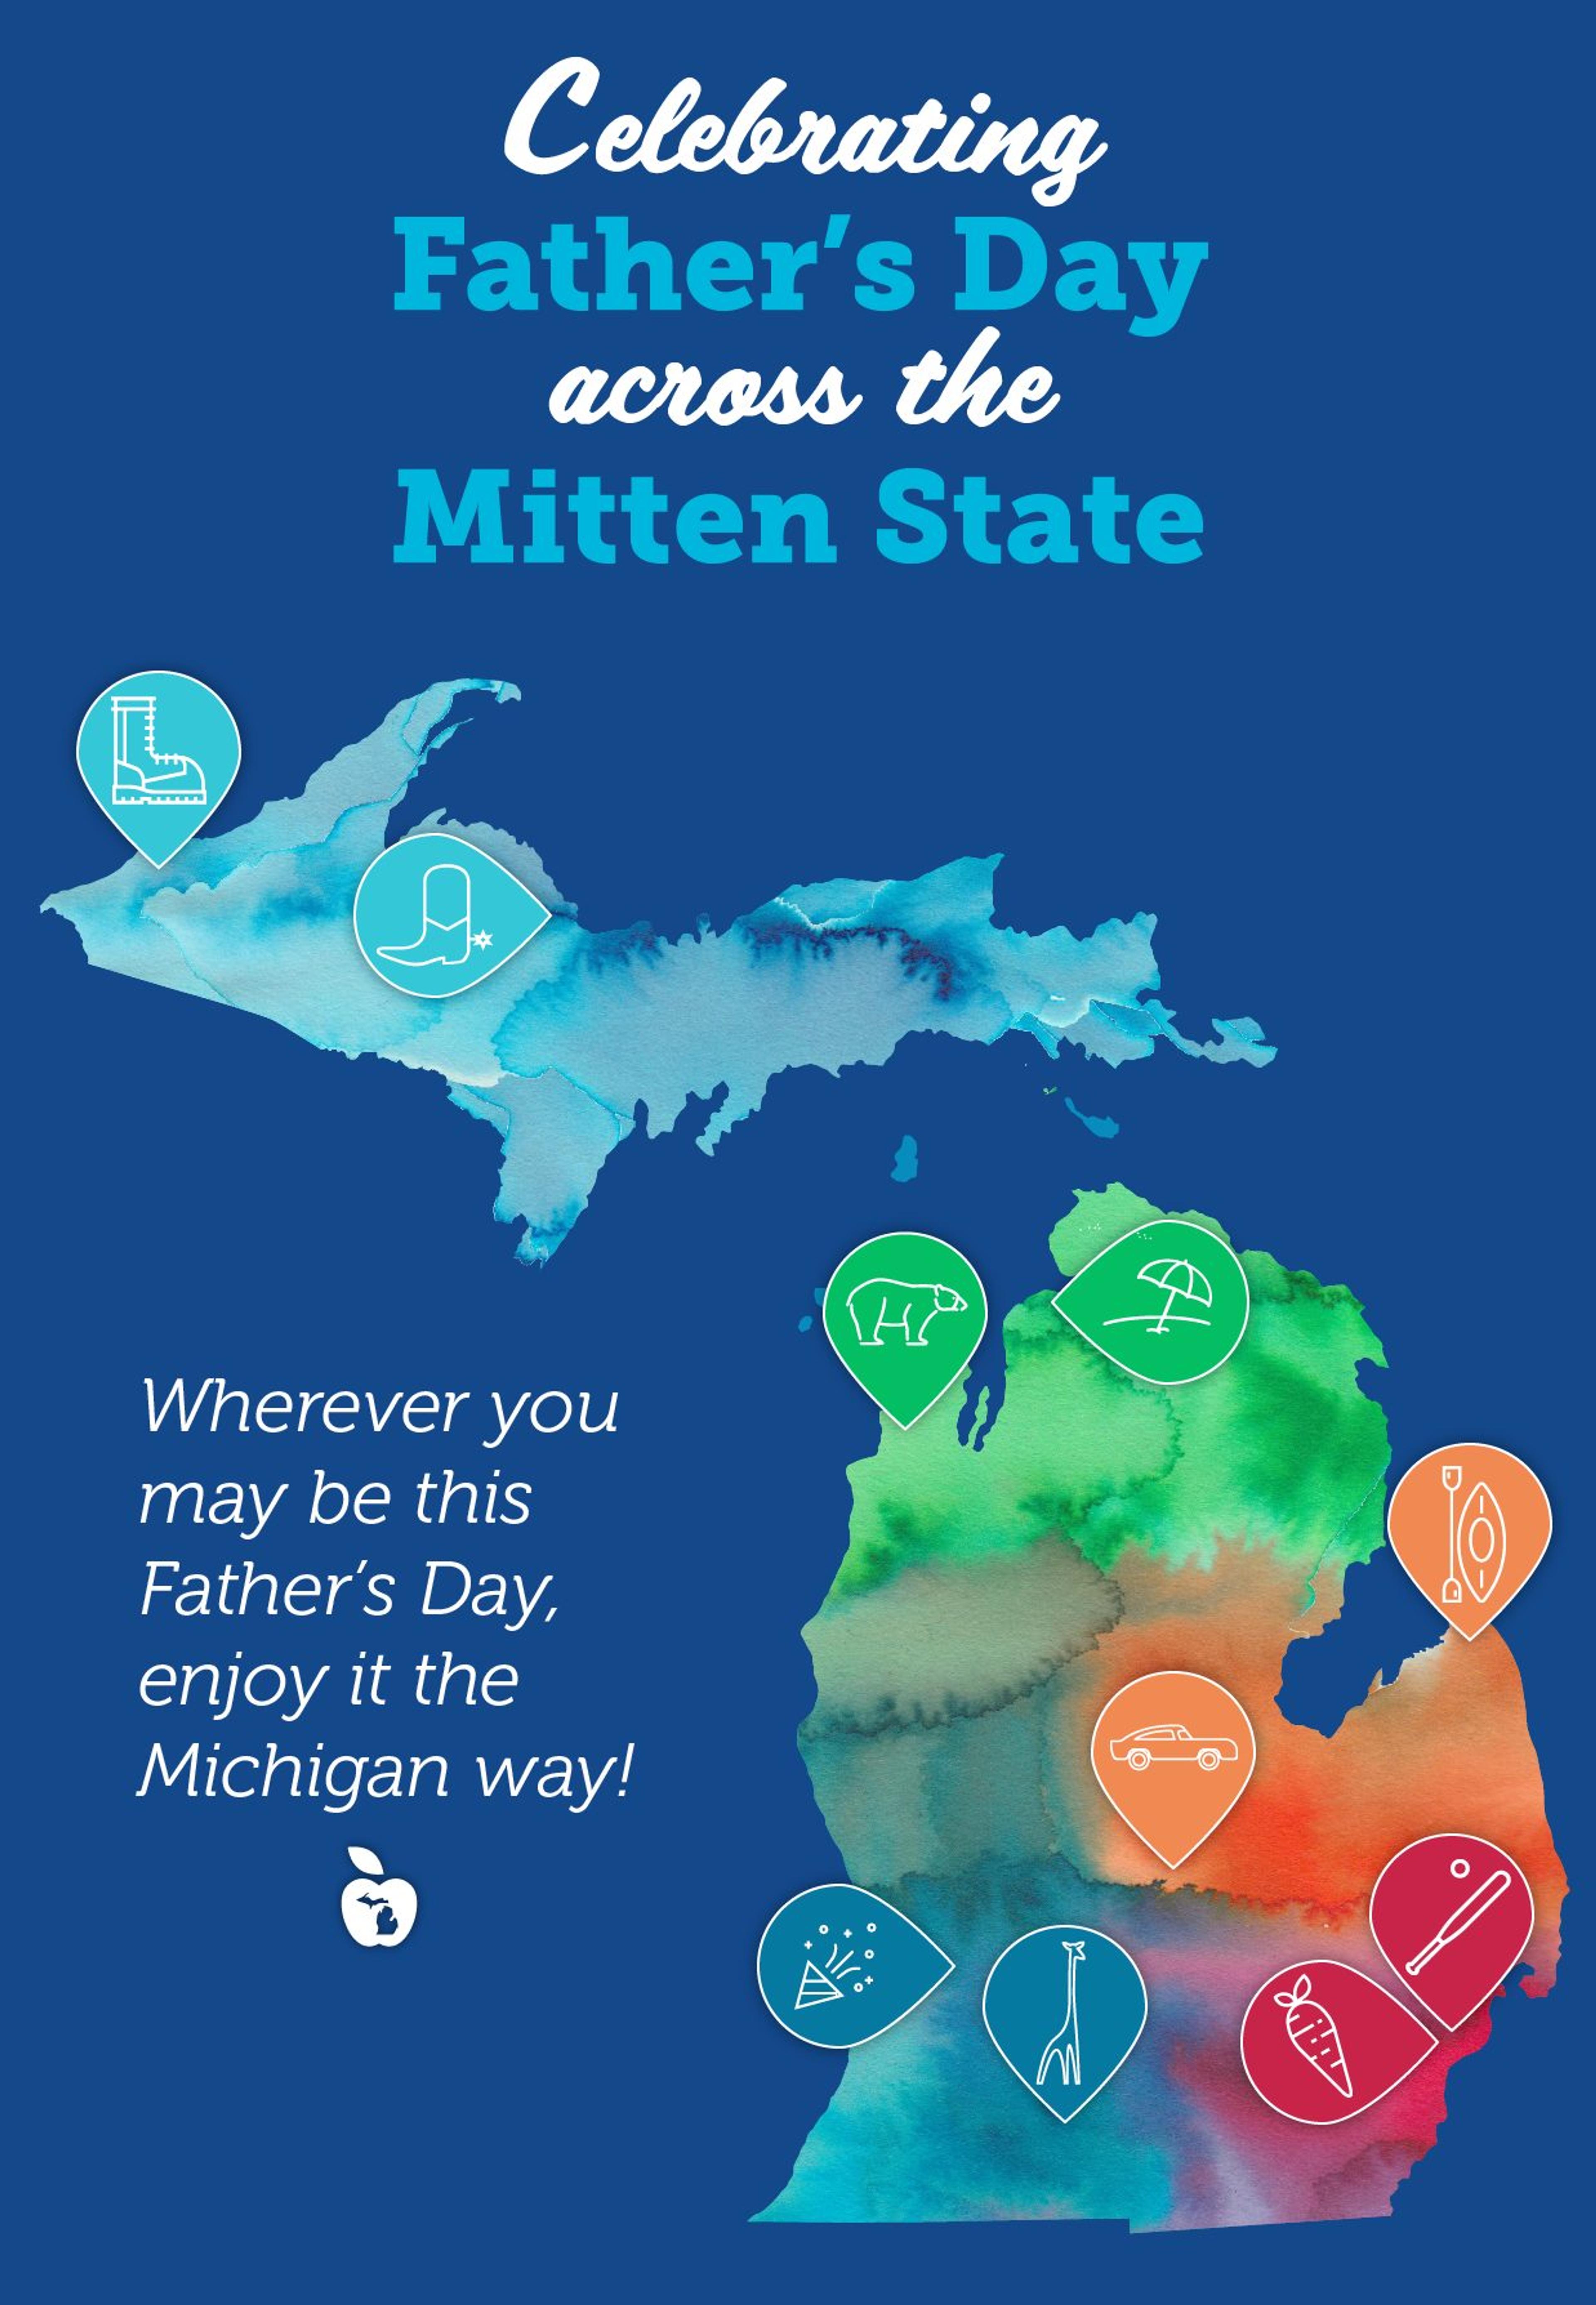 Celebrating Father's Day across the Mitten State. Map of Michigan.